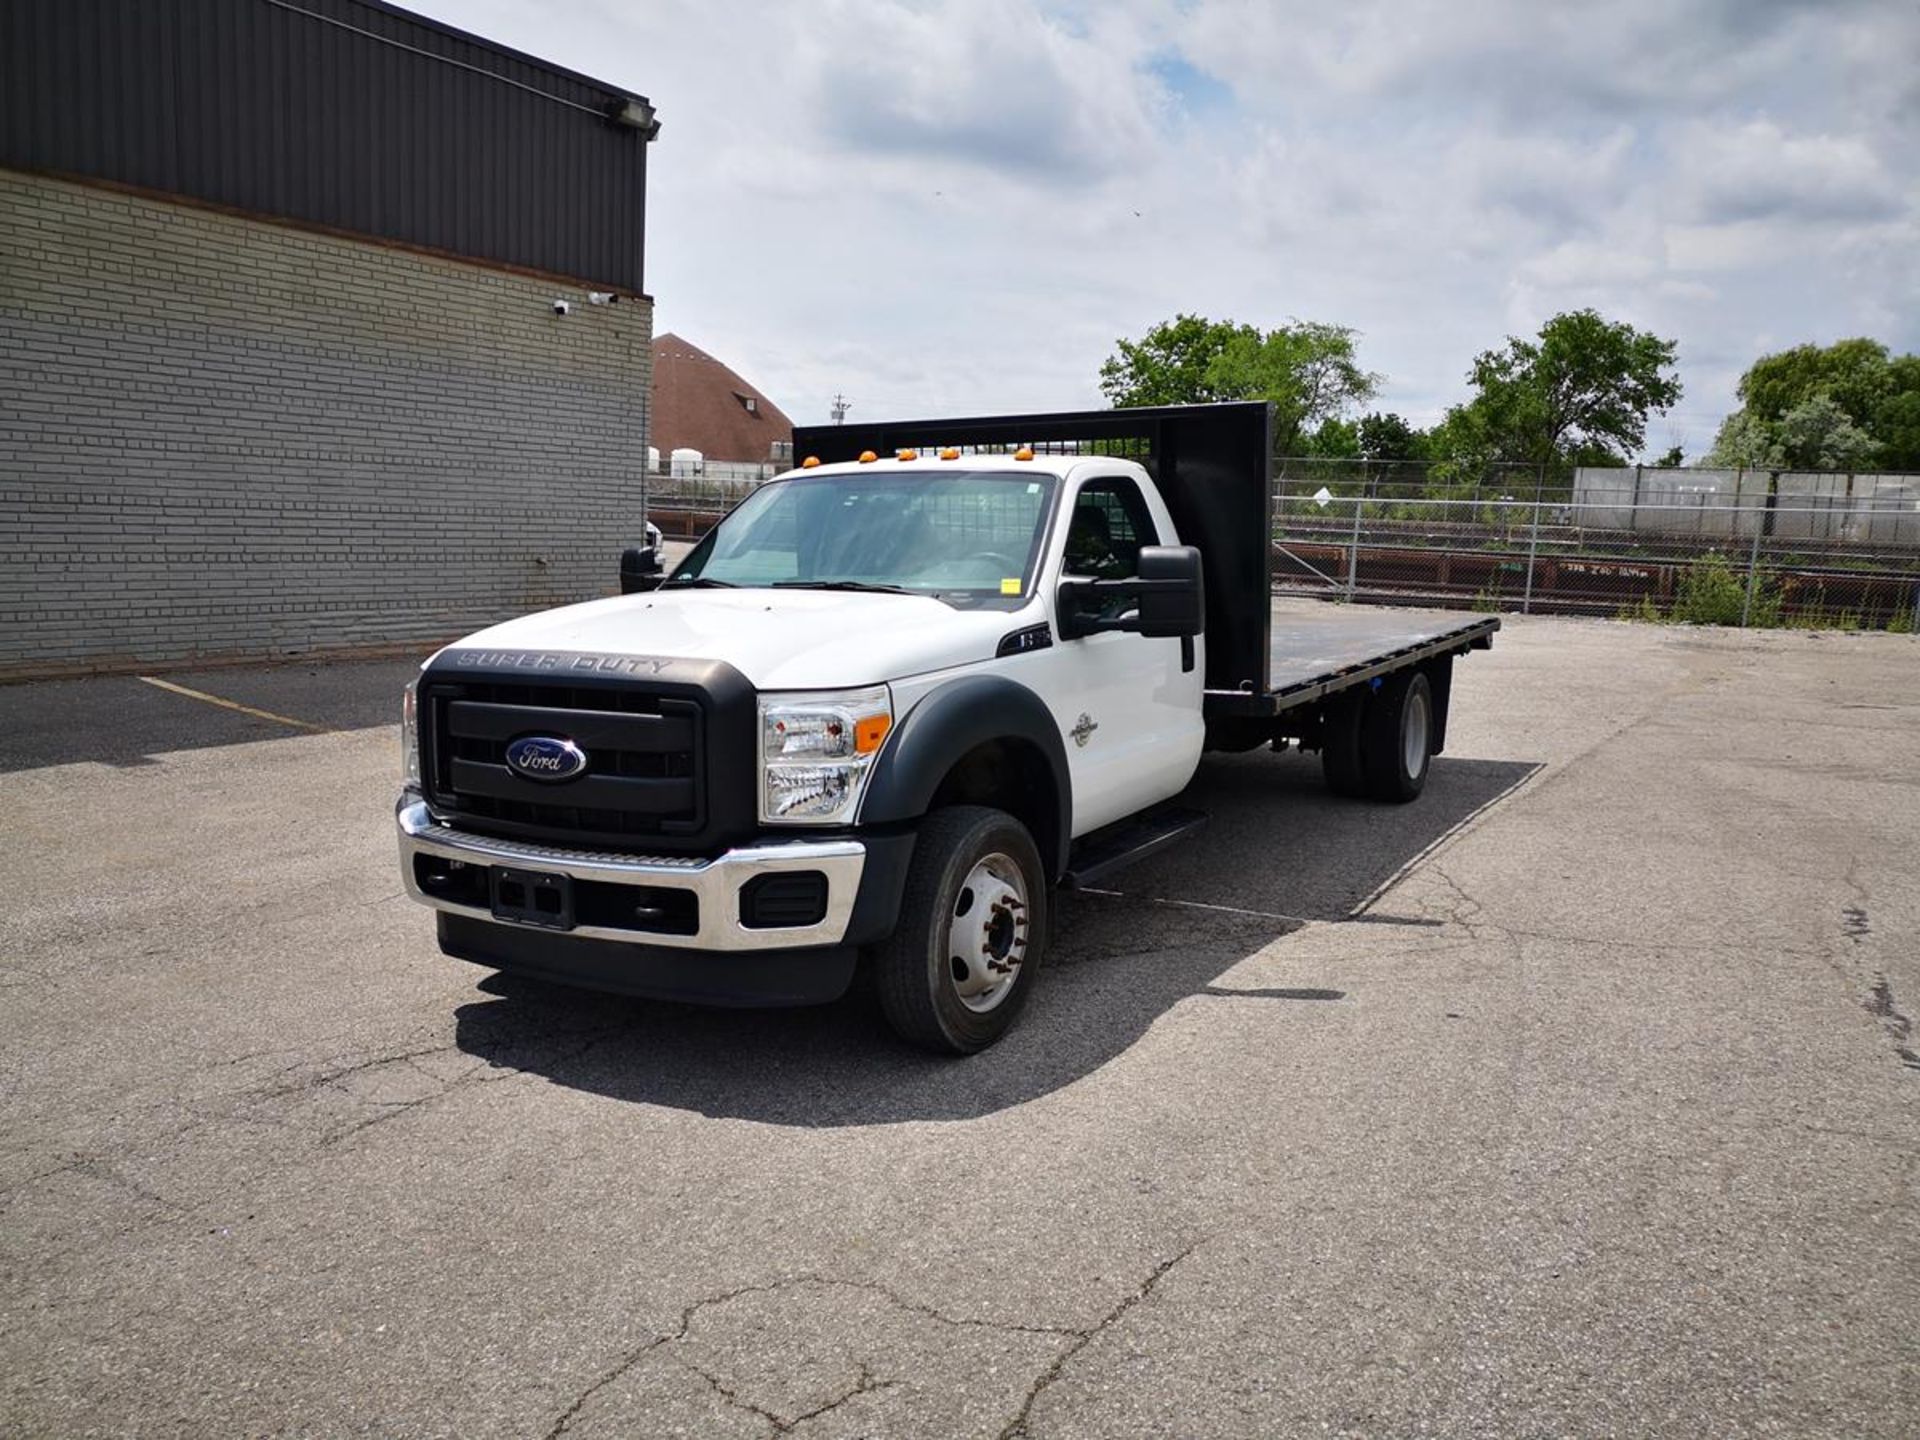 2016 FORD, F550 SUPER DUTY, 15' FLATBED TRUCK - Image 3 of 22